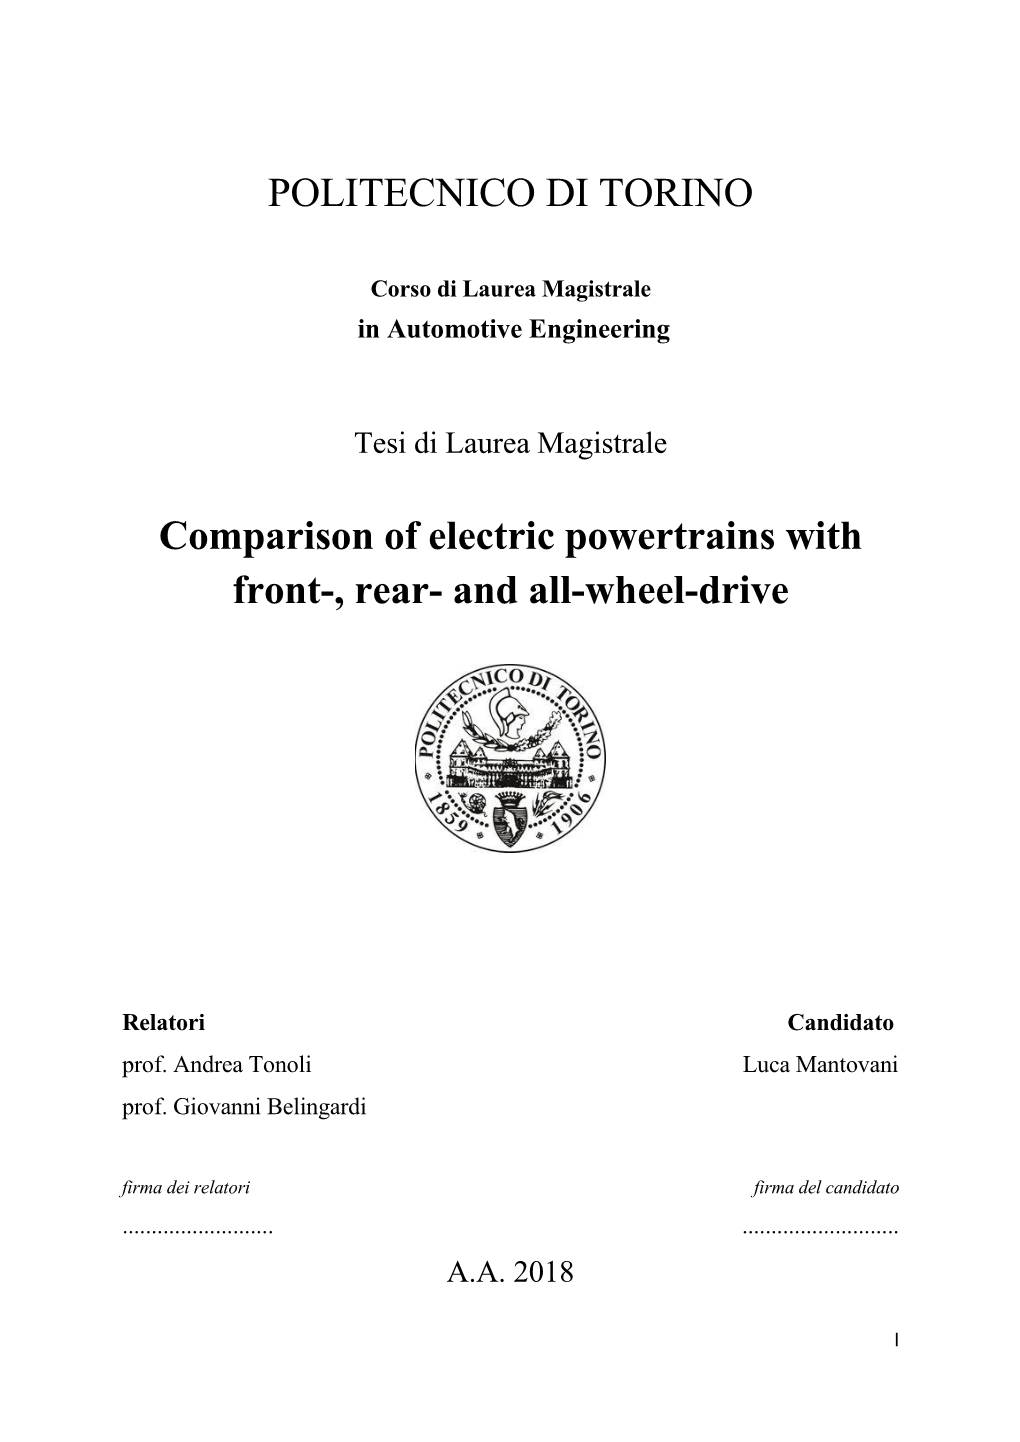 POLITECNICO DI TORINO Comparison of Electric Powertrains with Front-, Rear- and All-Wheel-Drive